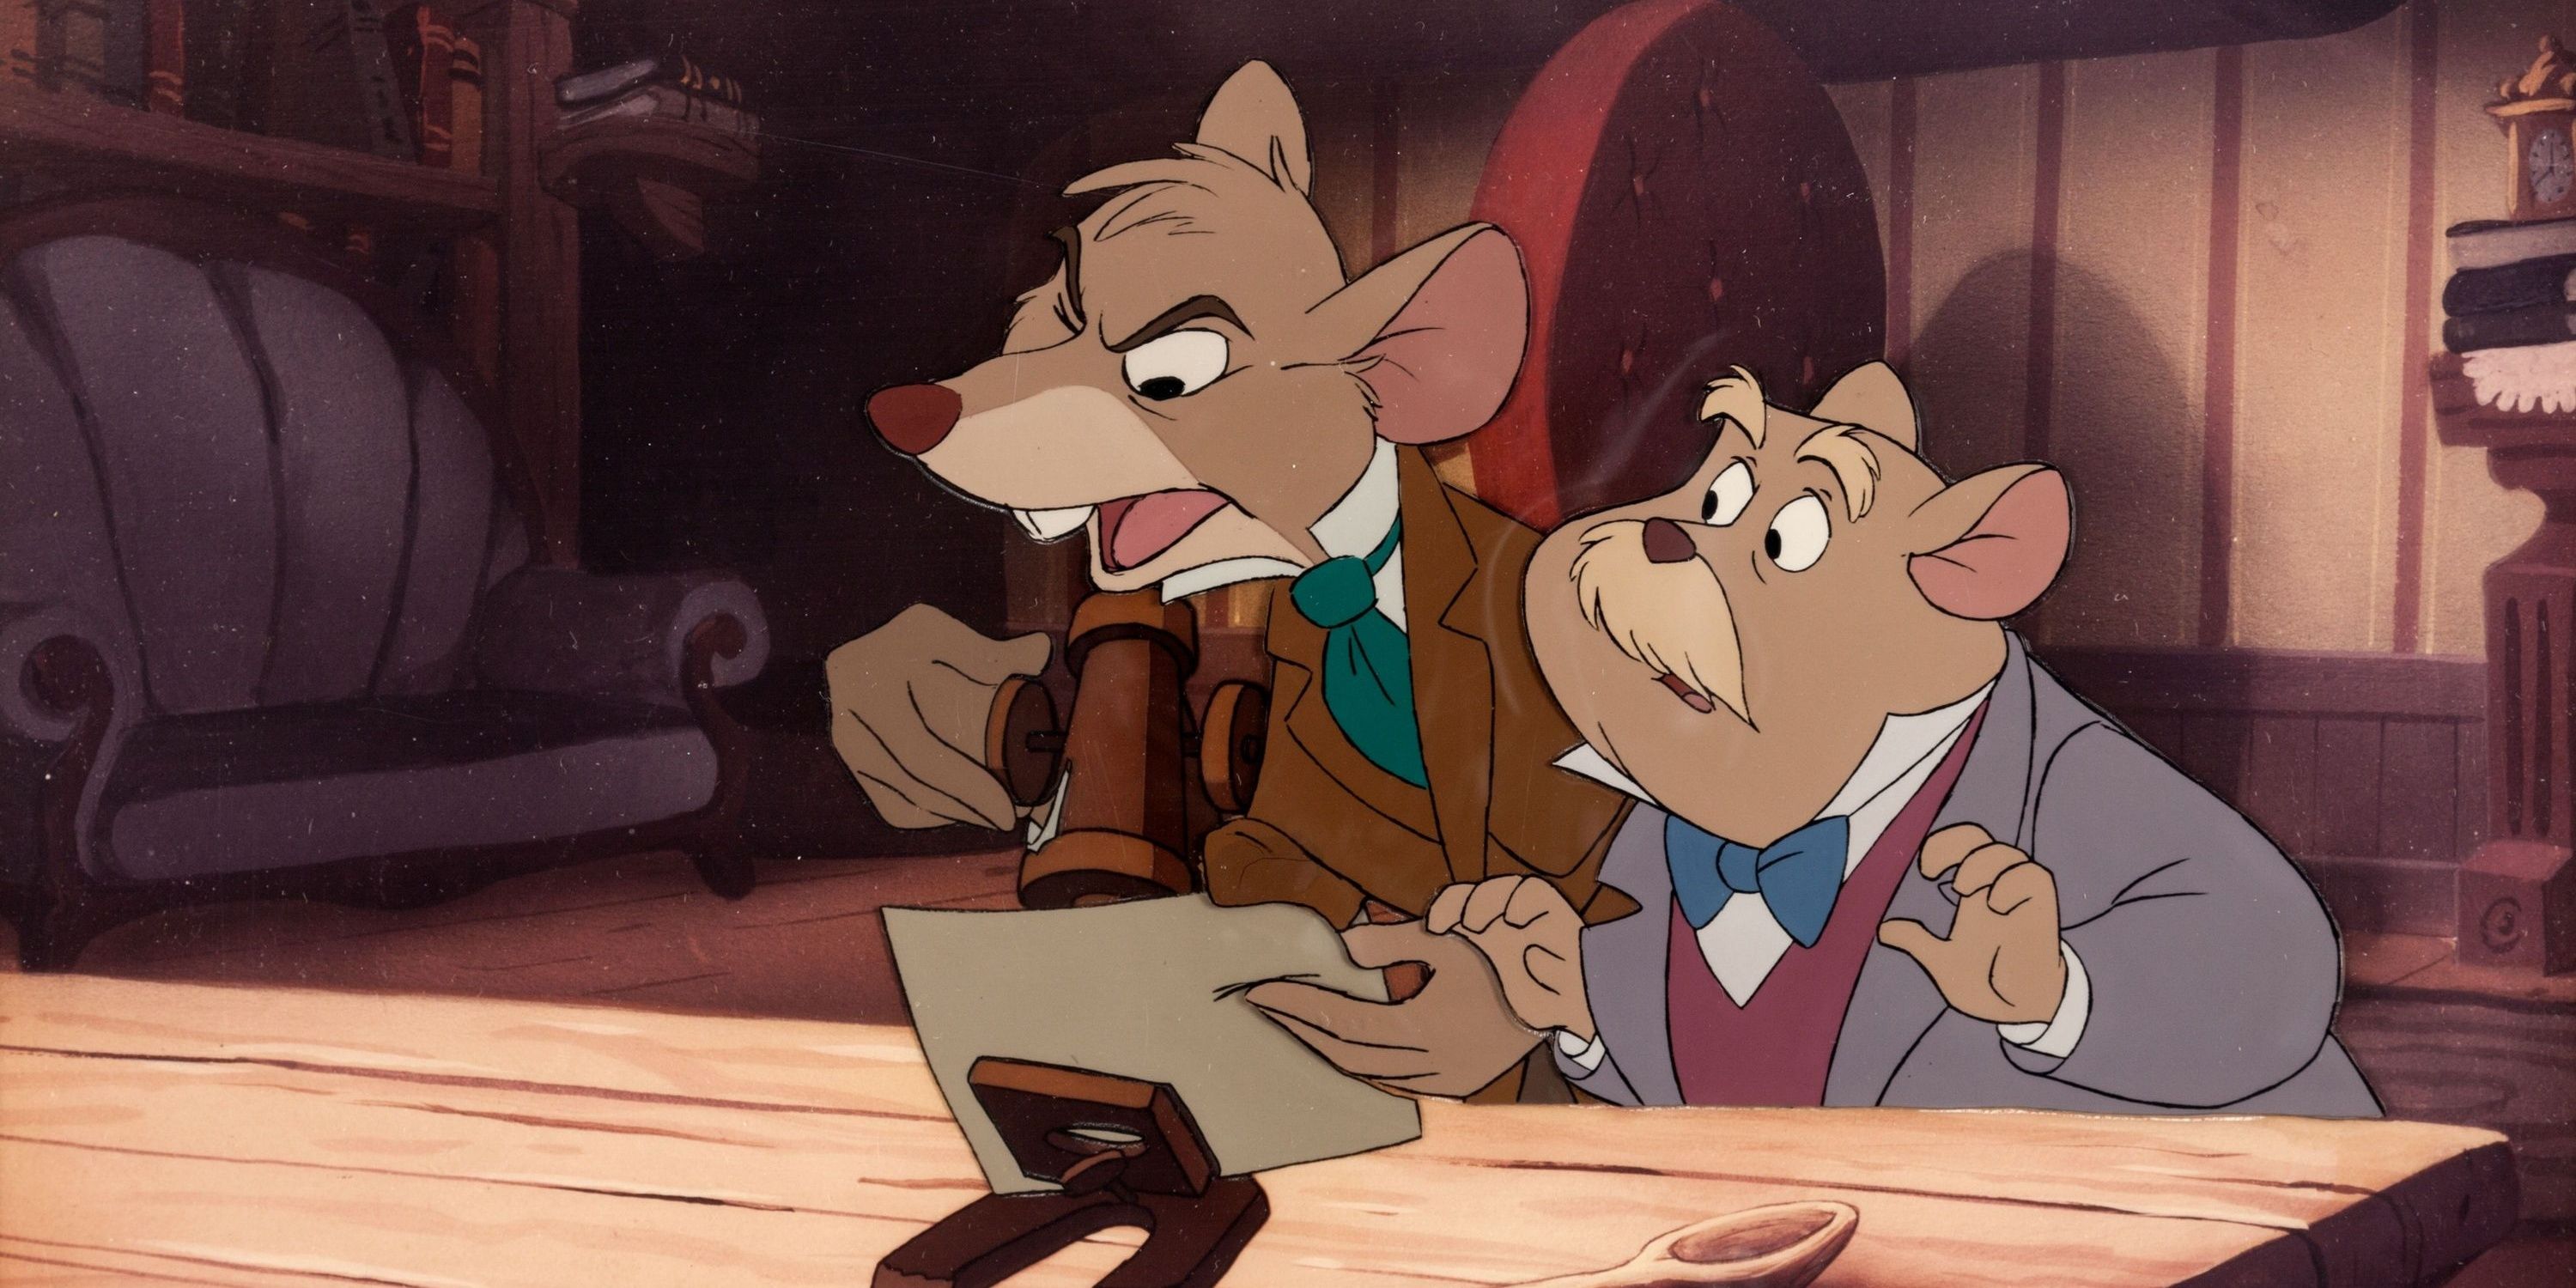 Basil and Dawson examining a paper in The Great Mouse Detective